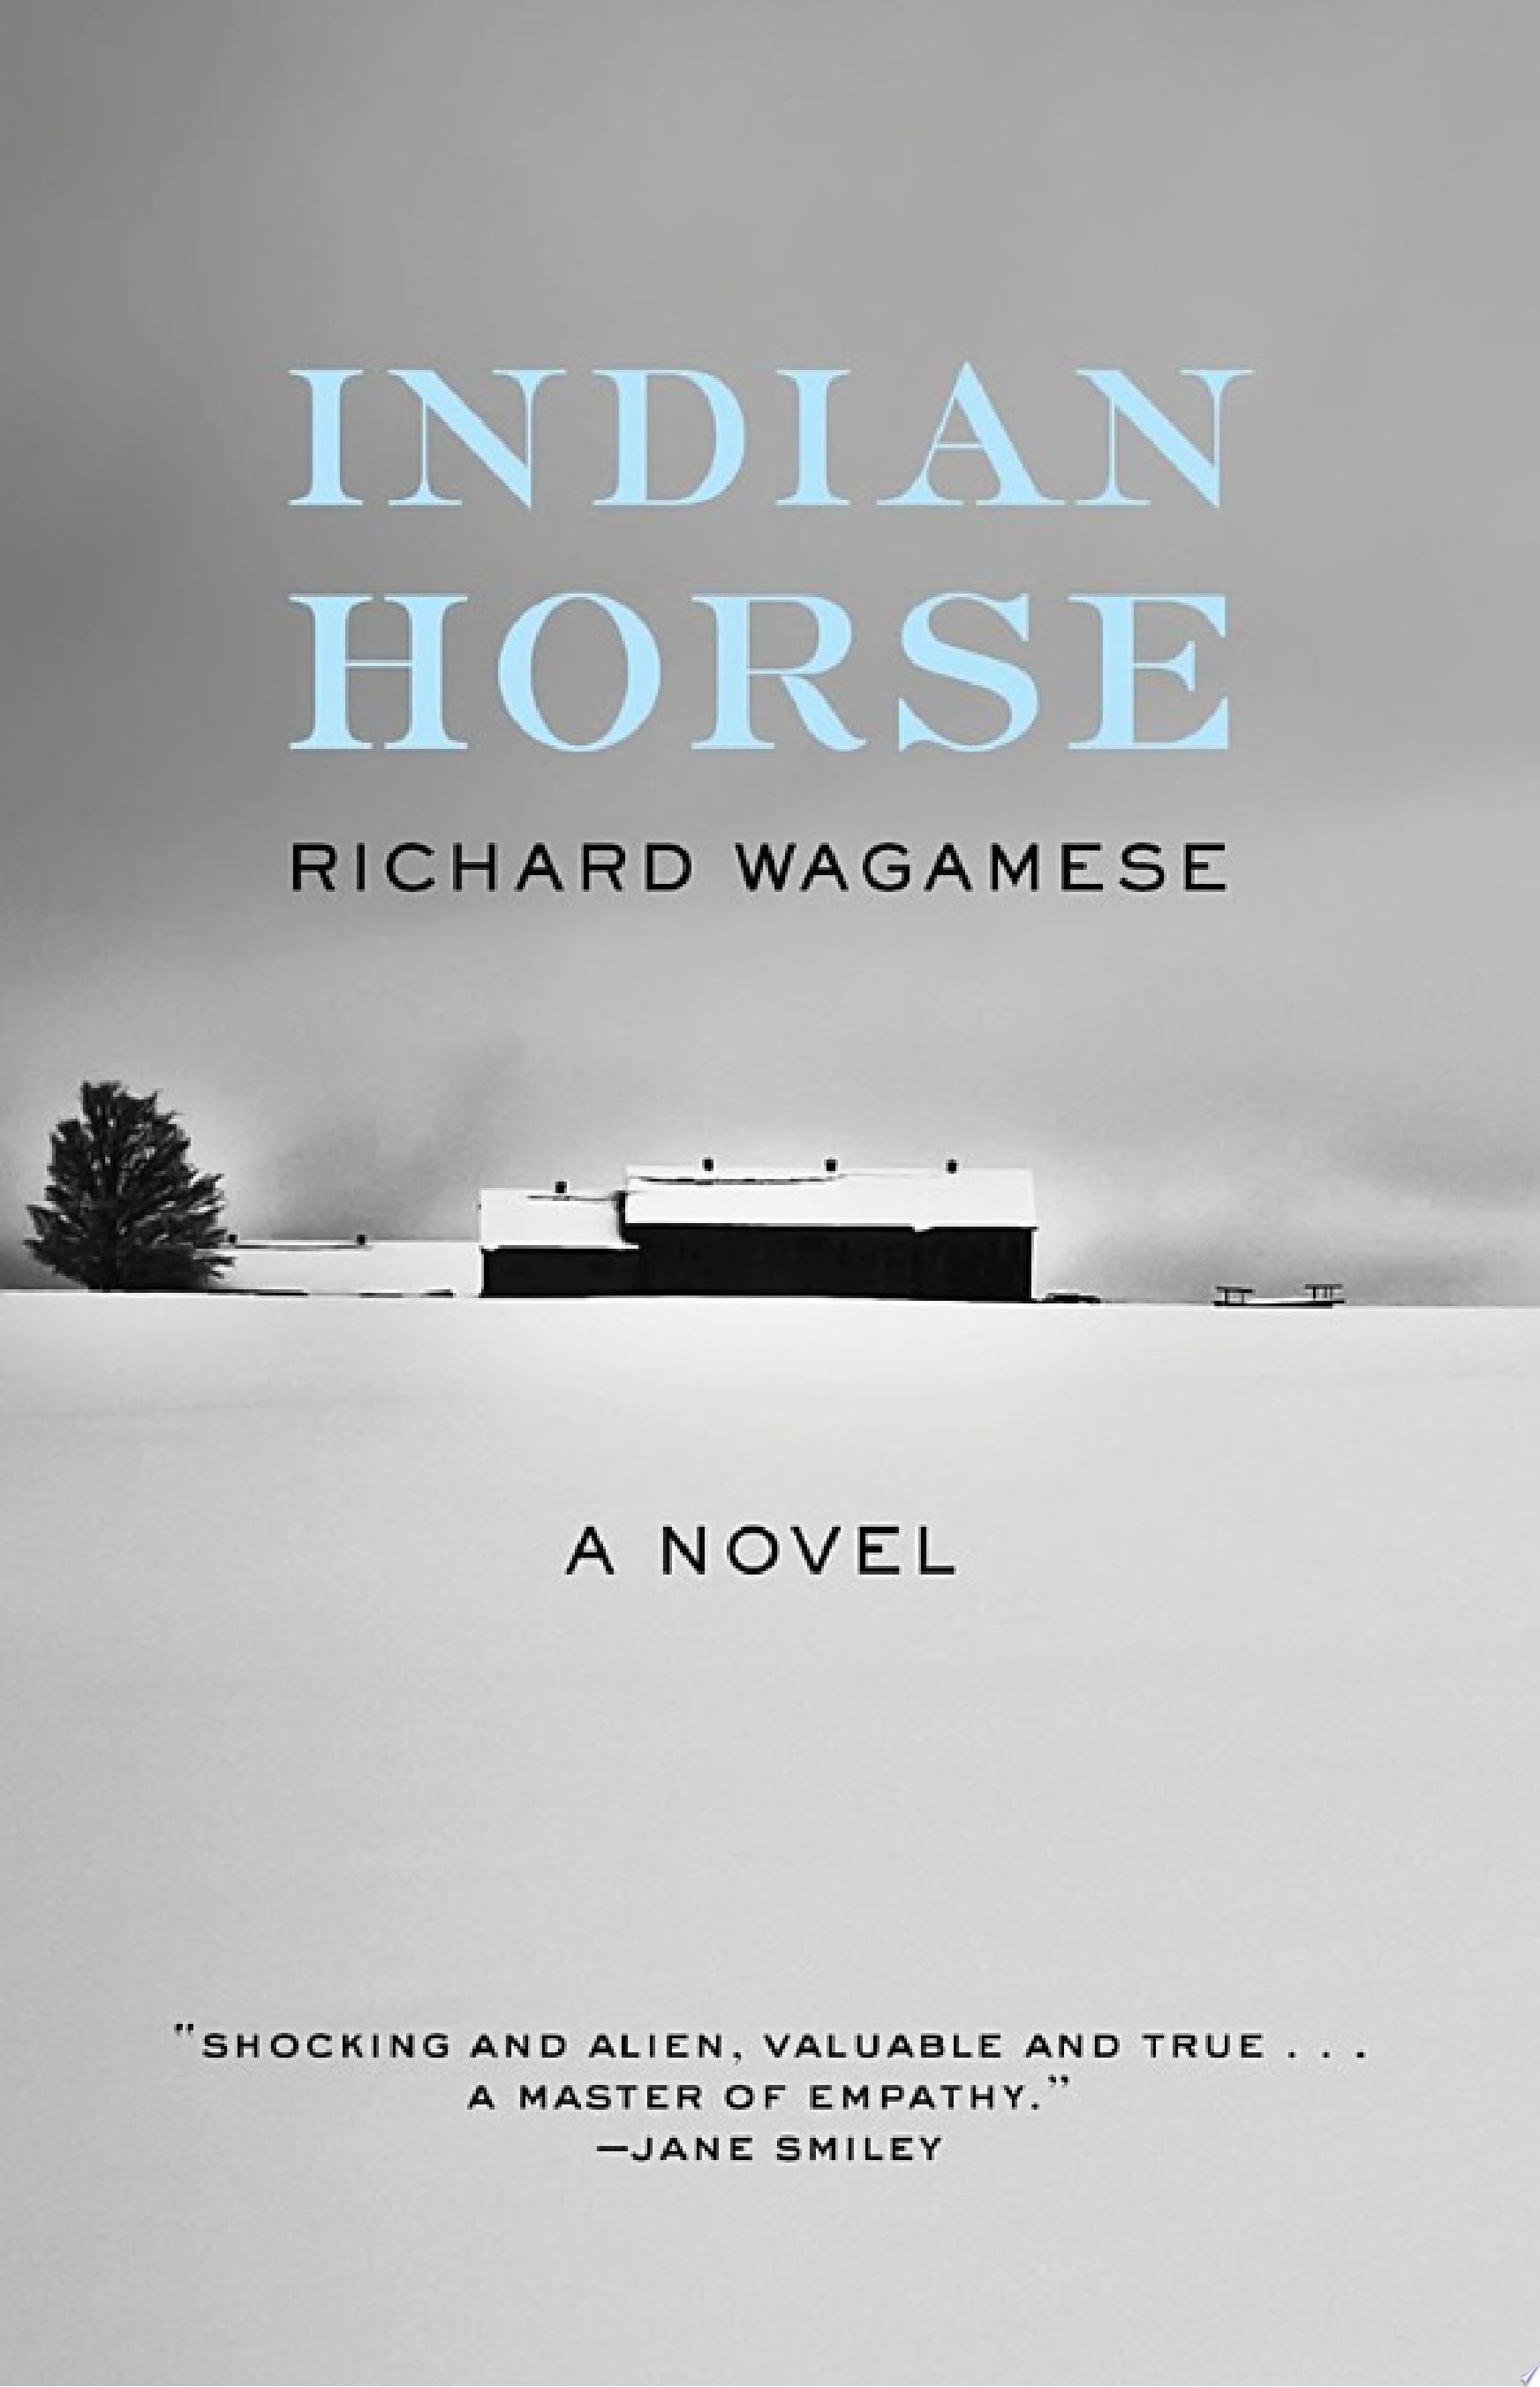 Image for "Indian Horse"